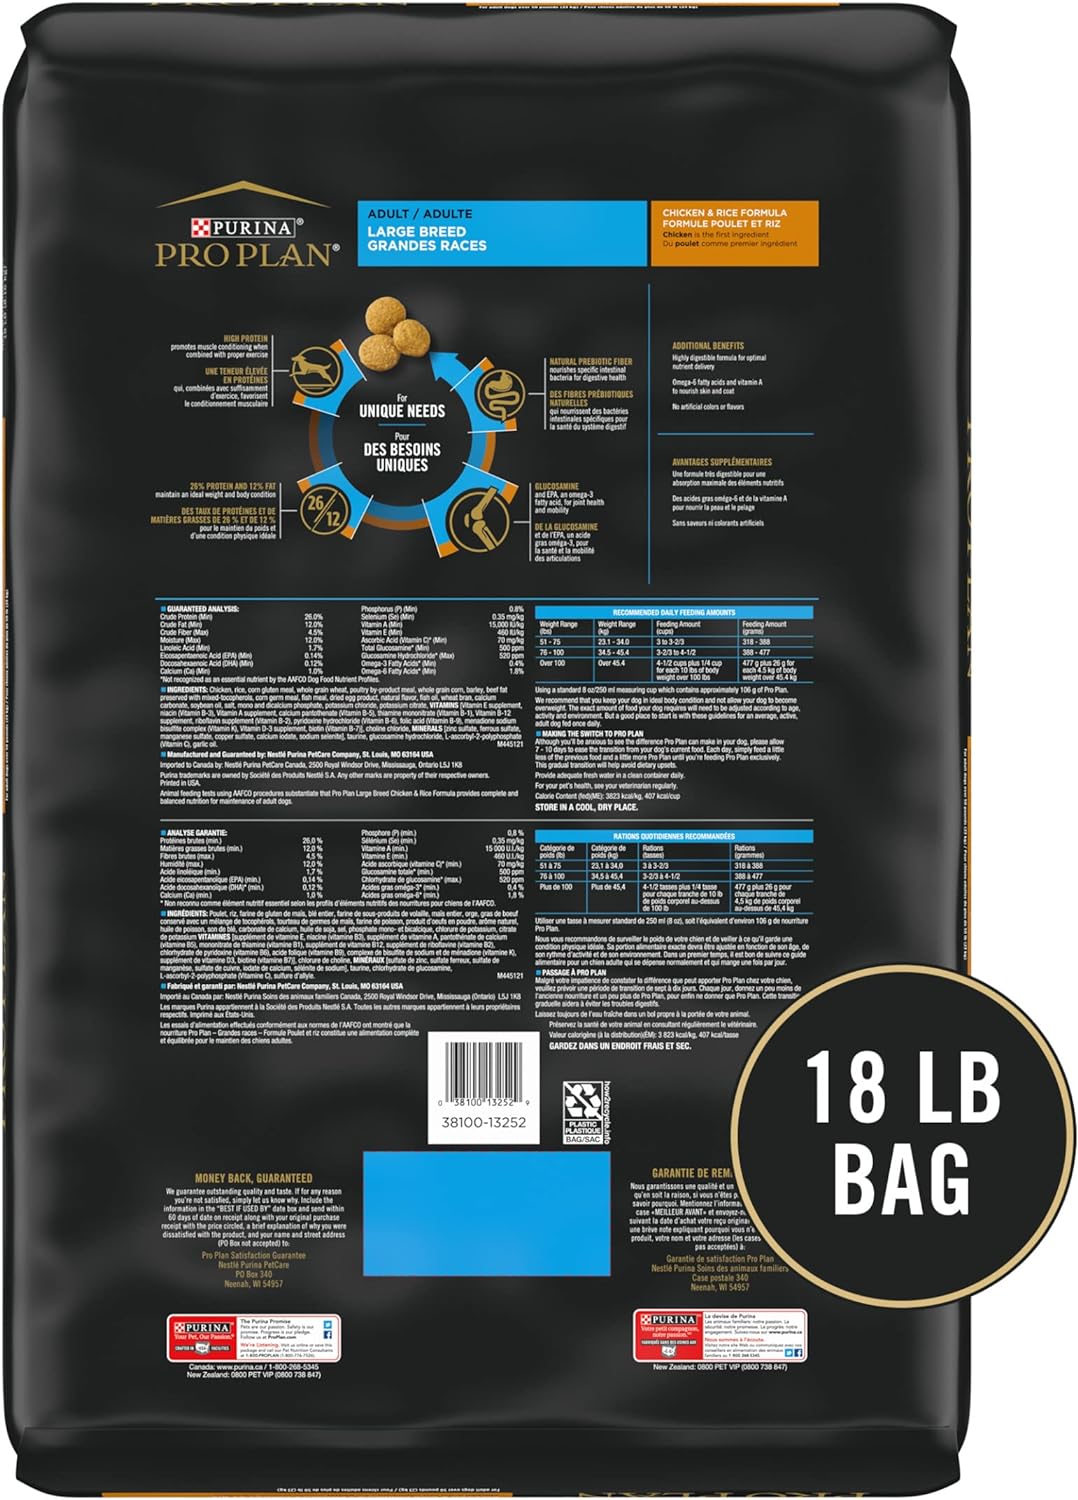 Purina Pro Plan High Protein, Digestive Health Large Breed Dry Dog Food, Chicken and Rice Formula - 18 lb. Bag: Dry Pet Food: Pet Supplies: Amazon.com